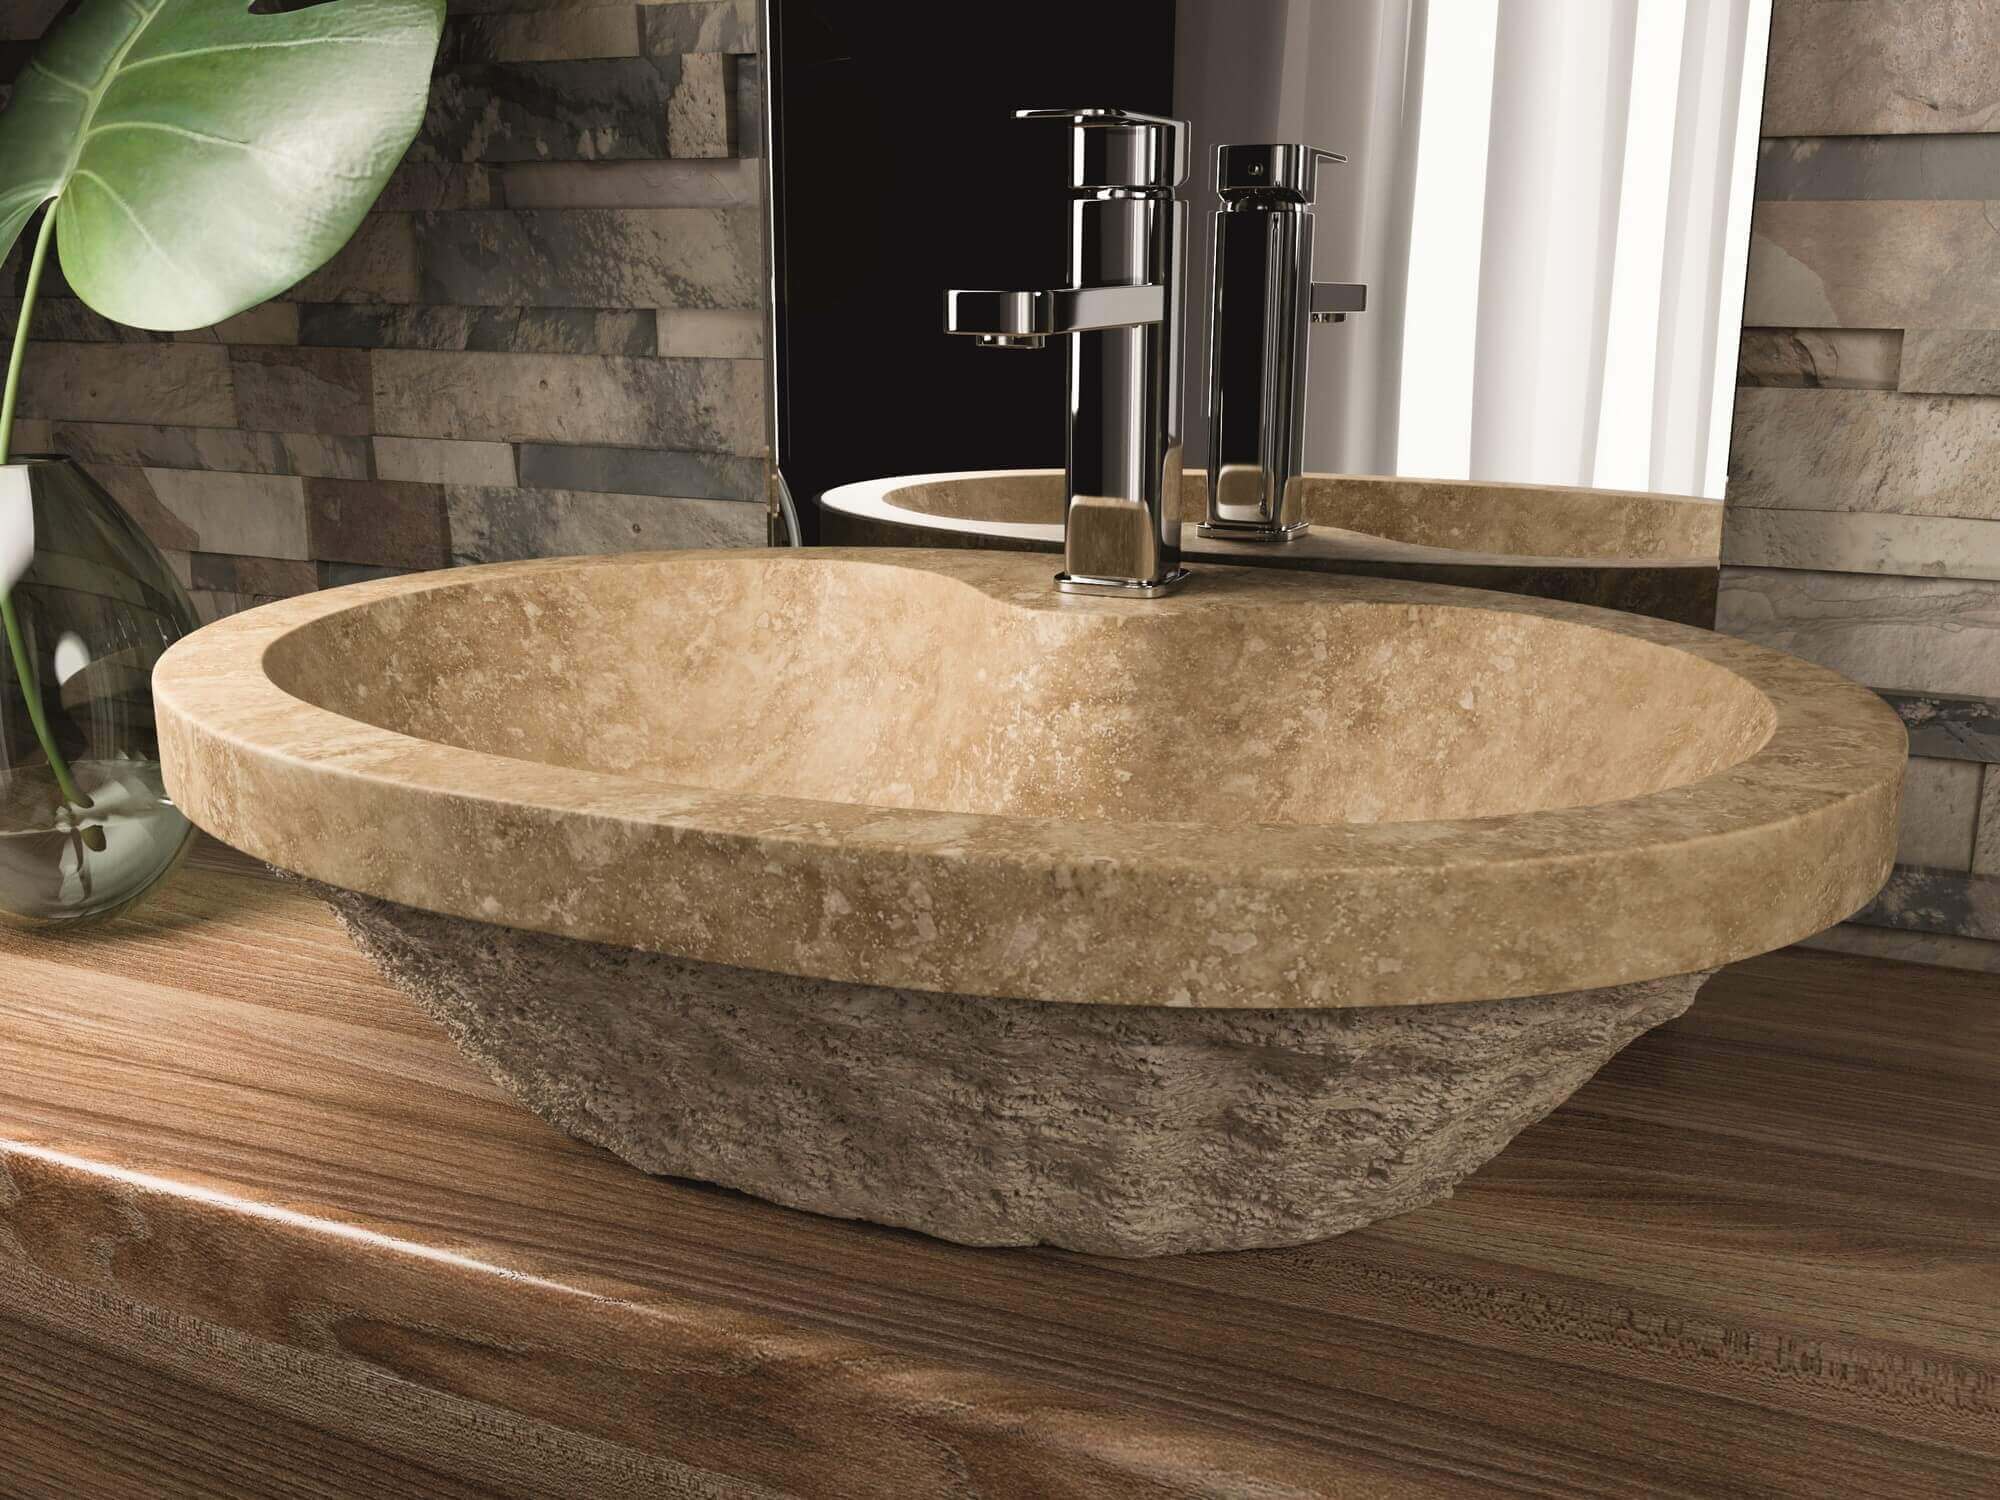 Lavabo RS 47 Travertine pared st 305 - Natural stone sinks